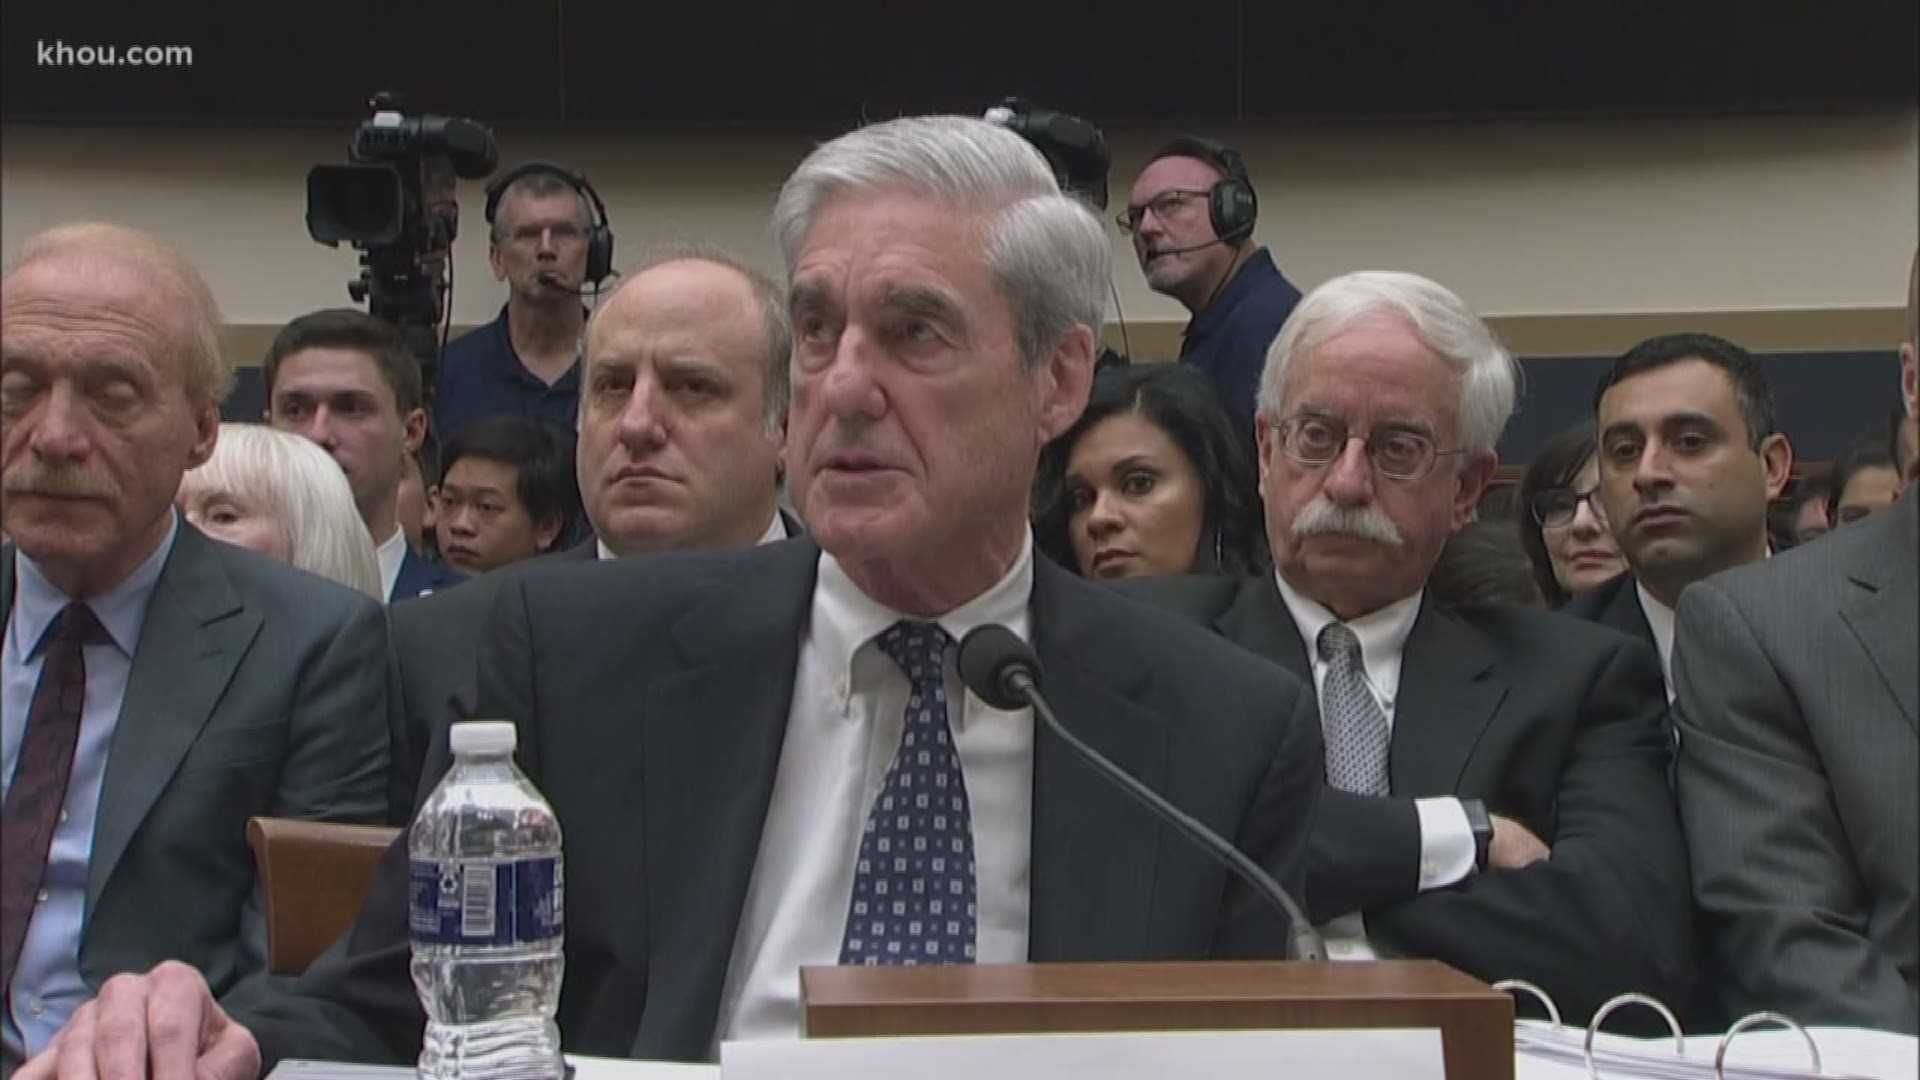 Former Special Counsel Robert Mueller gave his testimony on the Russian interference in the 2016 elections.